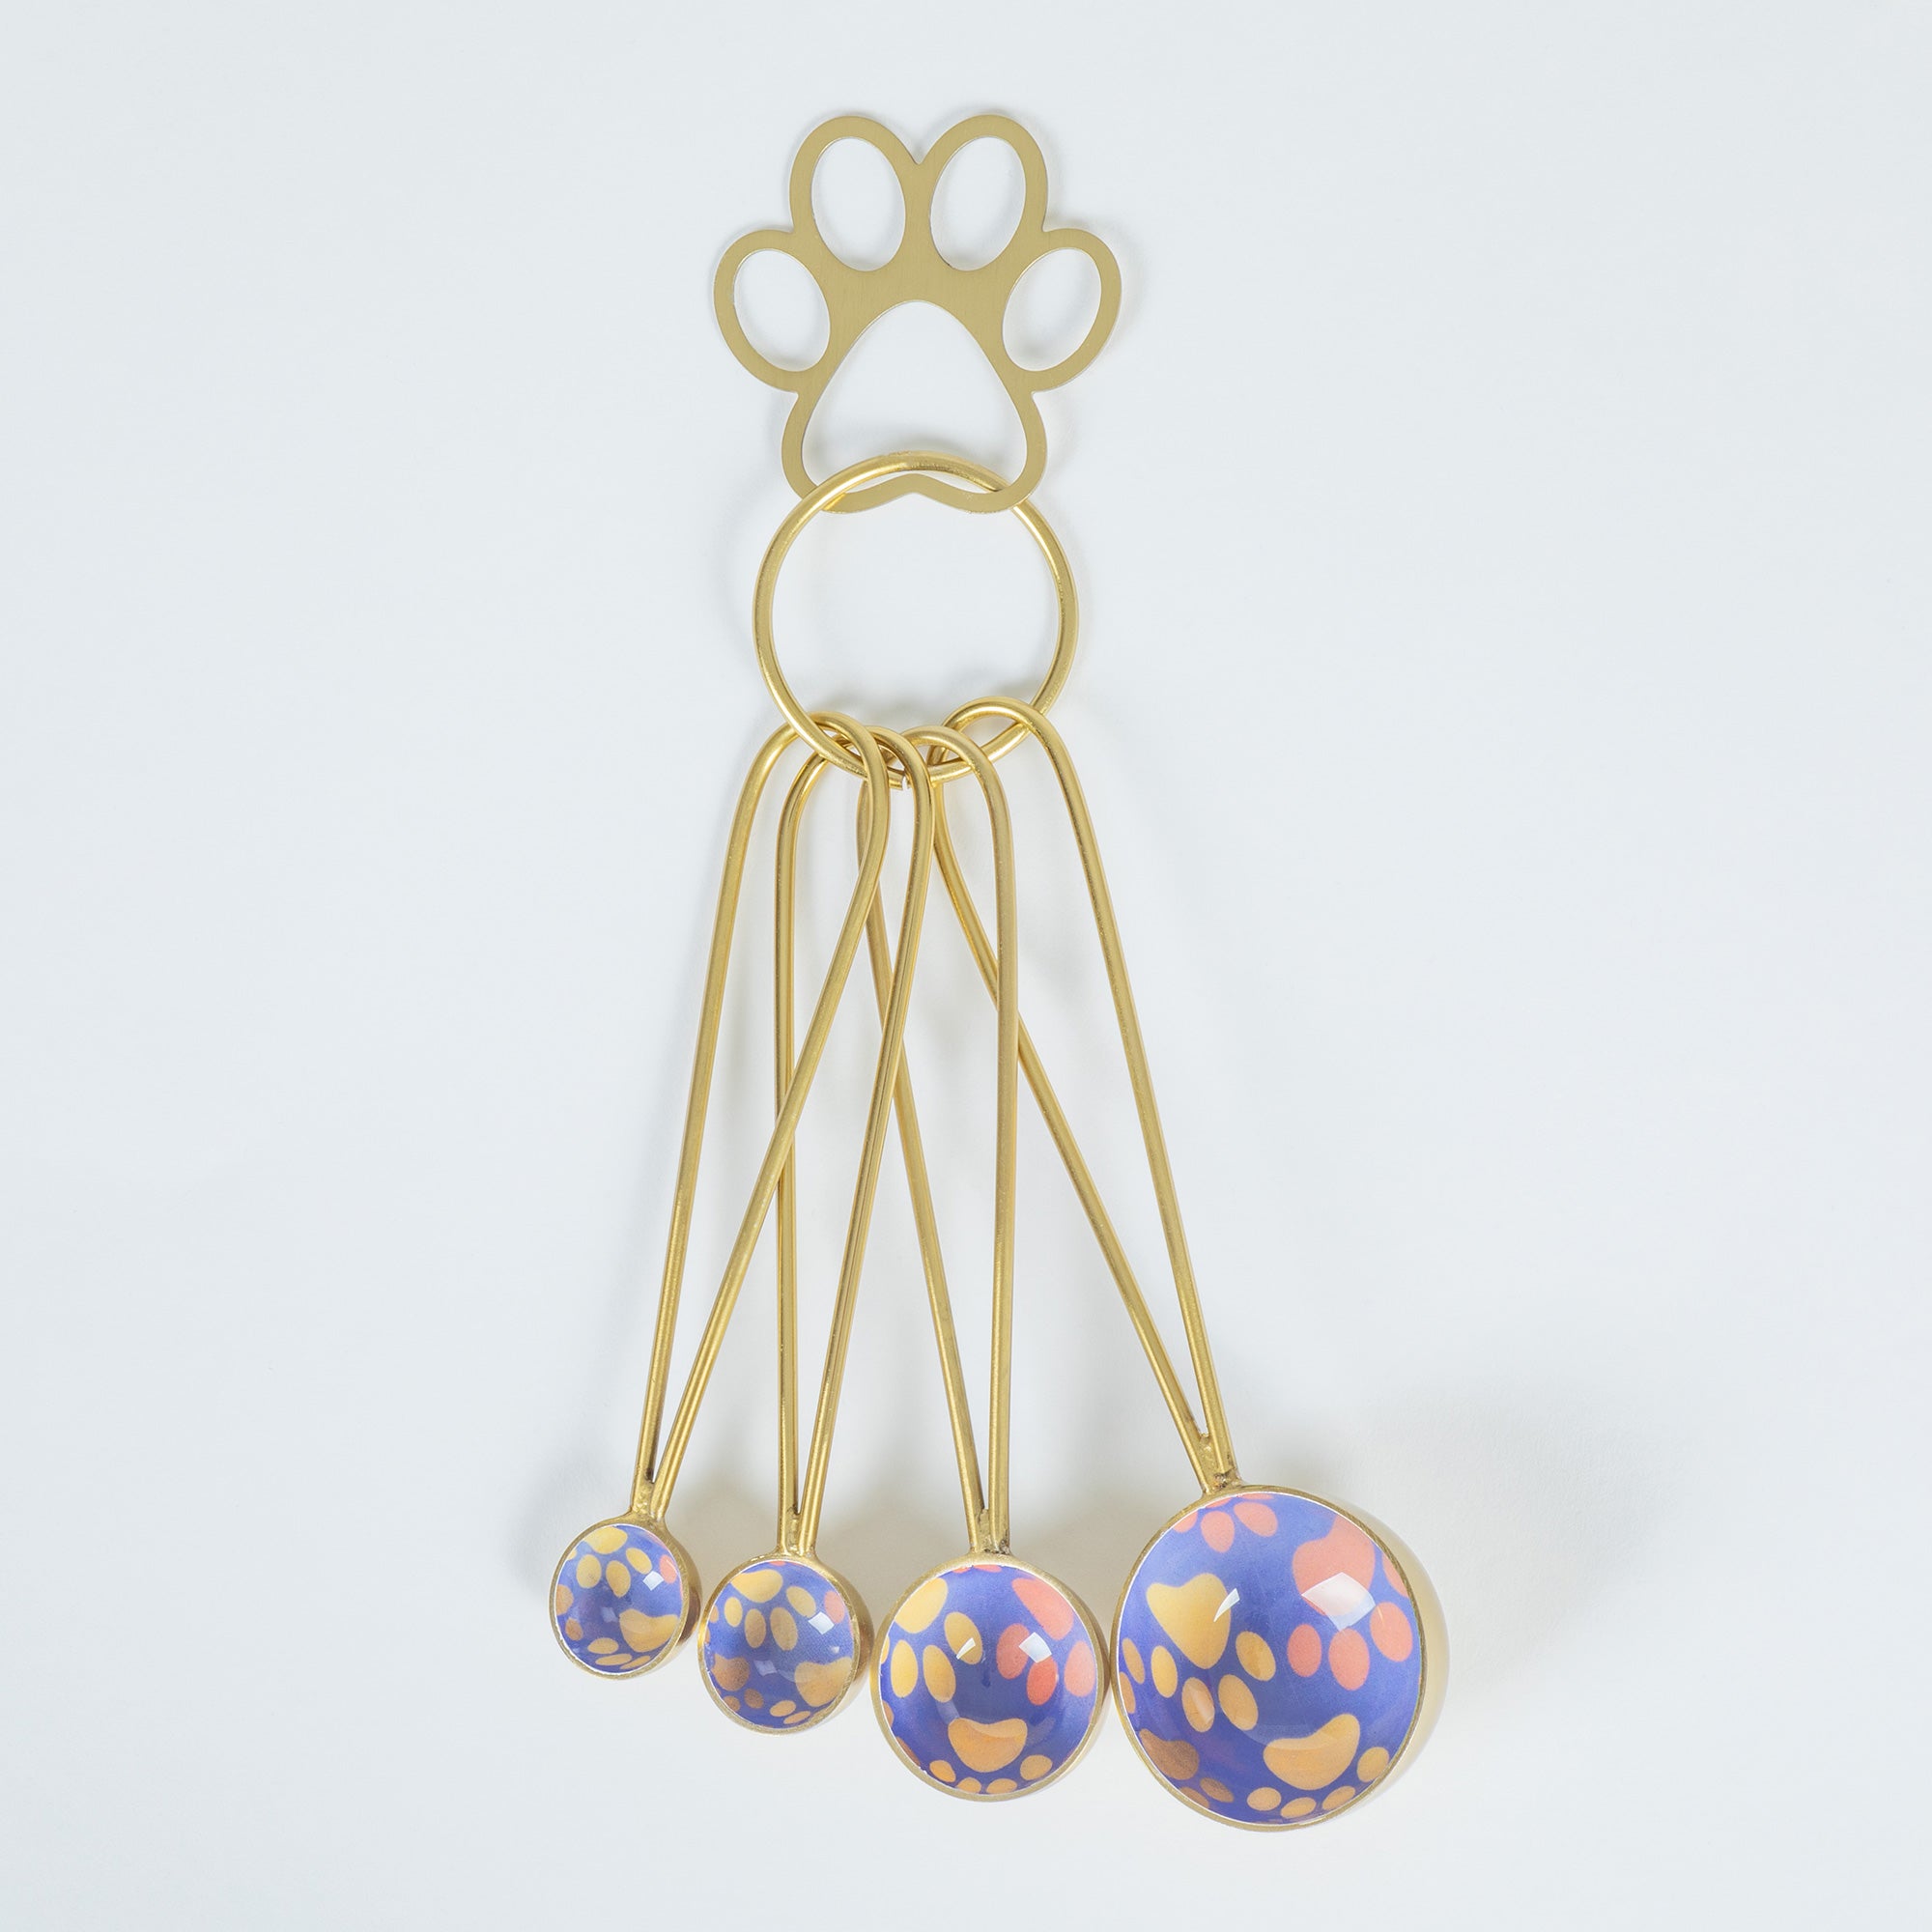 Pawfectly Patterned Measuring Tools - Diagonal Paws - Measuring Spoons